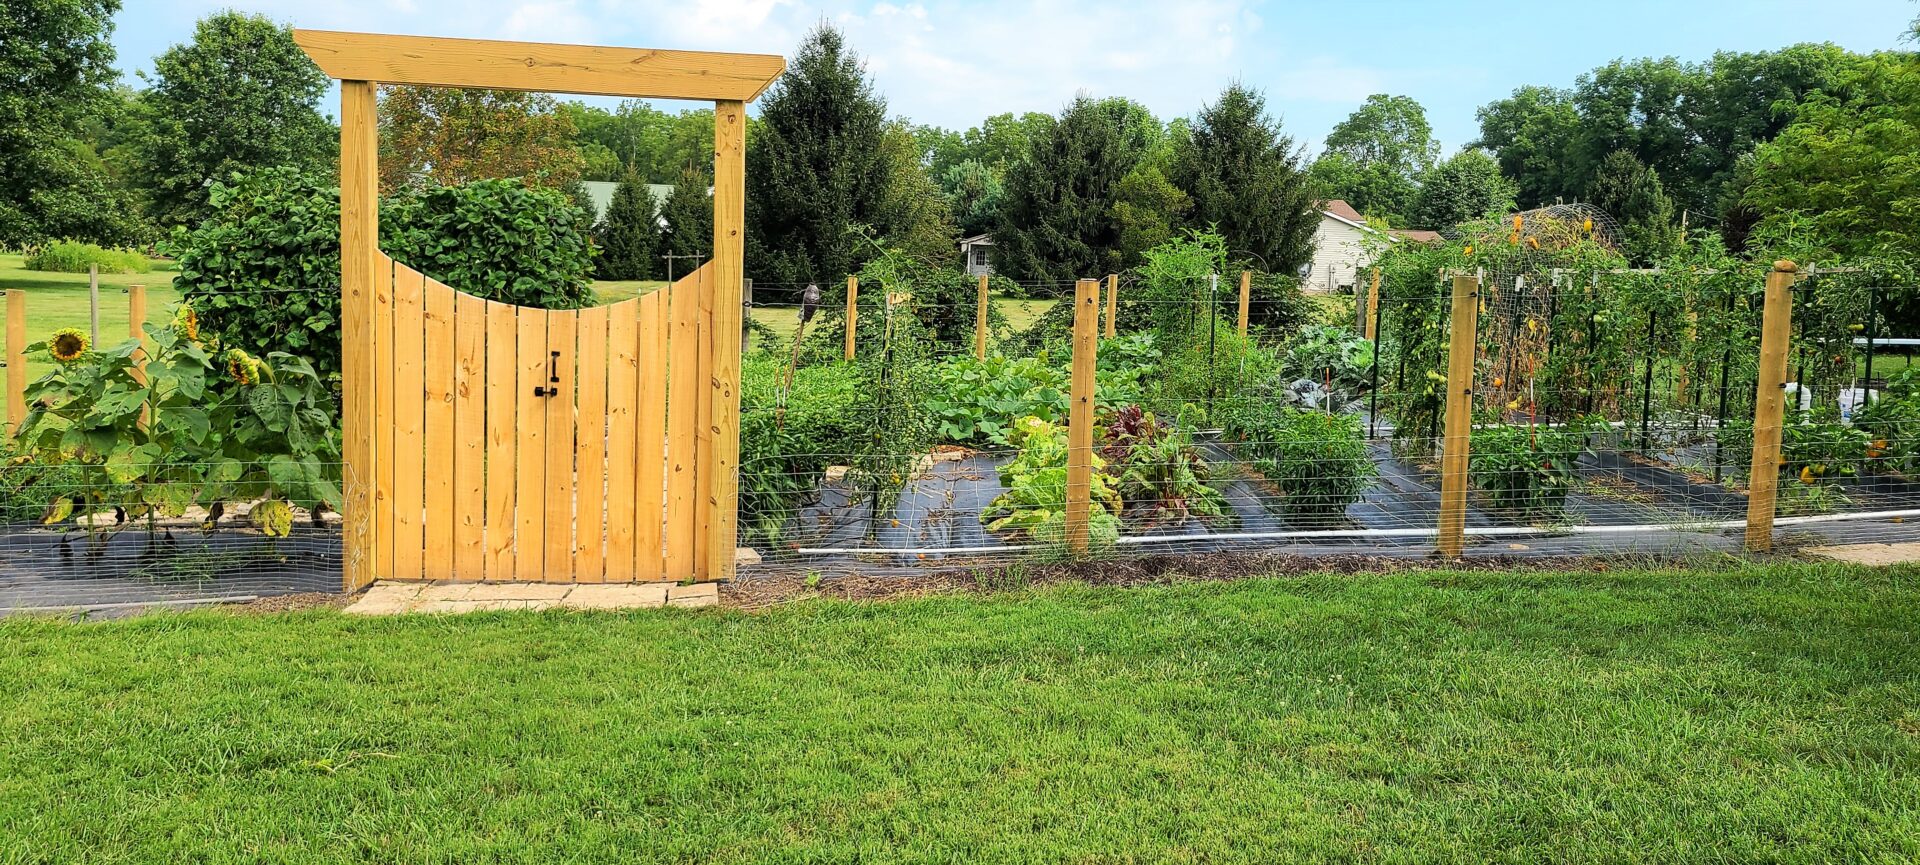 A gate leading into a large produce garden